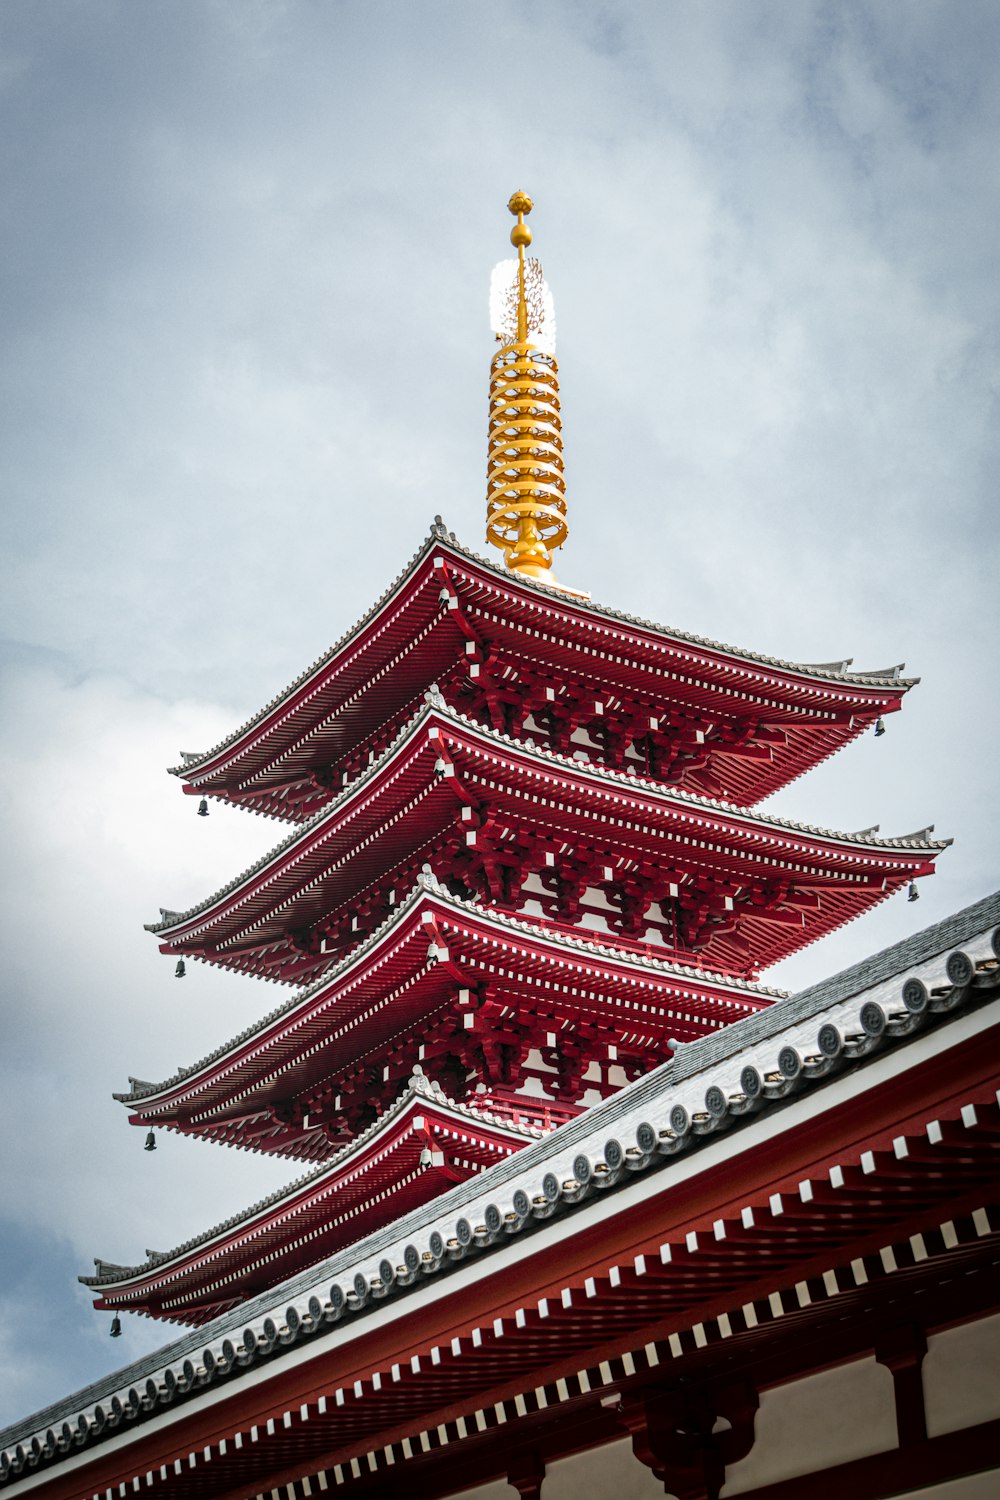 a tall red and white building with a gold roof